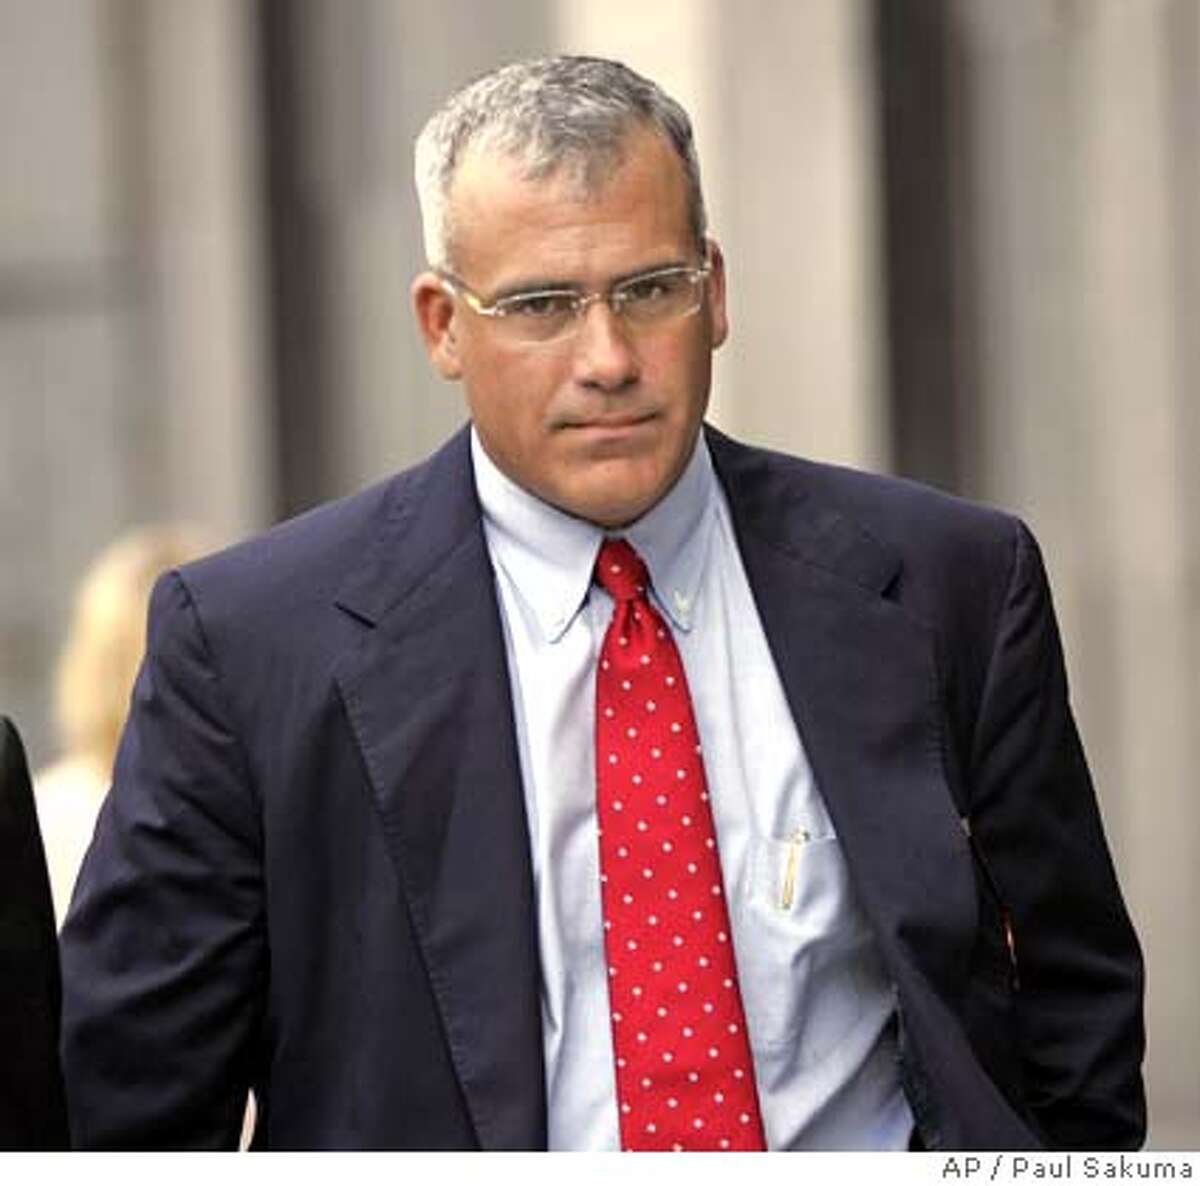 ** OMITS REFERENCE TO STEPHANIE JENSEN, WHO HAS NOT BEEN CRIMINALLY CHARGED ** Brocade's former CEO Gregory L. Reyes walks into a federal courthouse in San Francisco, Wednesday, Aug. 2, 2006. Reyes became the first chief executive to be criminally charged over alleged improper accounting of stock options. (AP Photo/Paul Sakuma) Ran on: 08-03-2006 Brocades former CEO Gregory Reyes walks into a federal courthouse in San Francisco to face securities fraud charges. OMITS REFERENCE TO STEPHANIE JENSEN, WHO HAS NOT BEEN CRIMINALLY CHARGED. STAND ALONE PHOTO